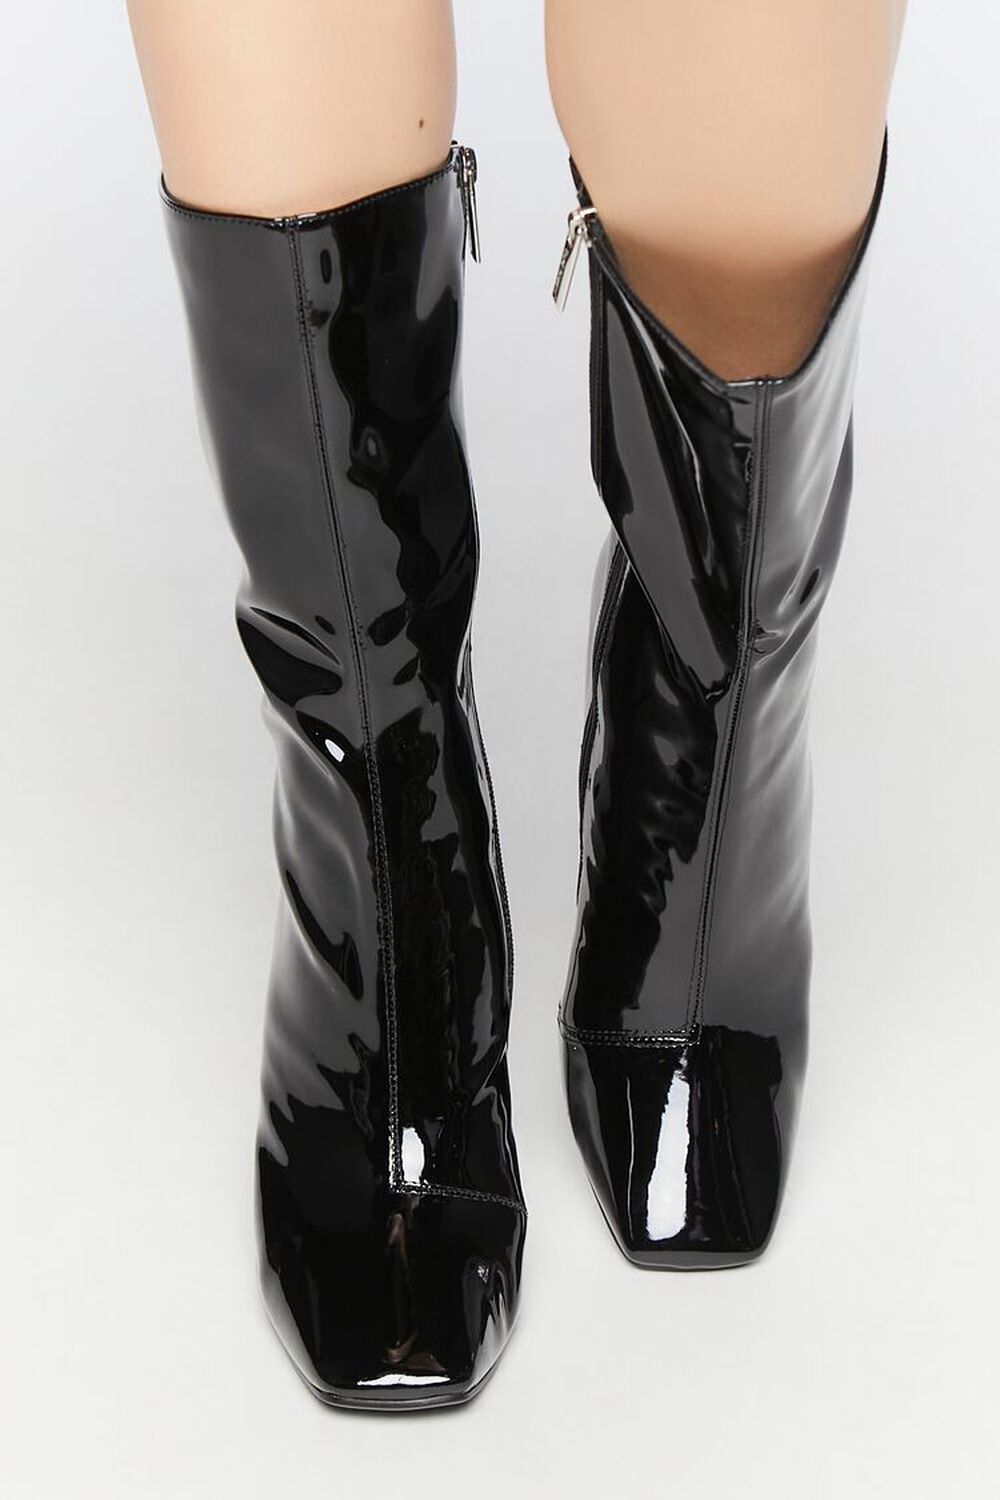 Faux Patent Leather Mid-Calf Boots Black Women's 9.5